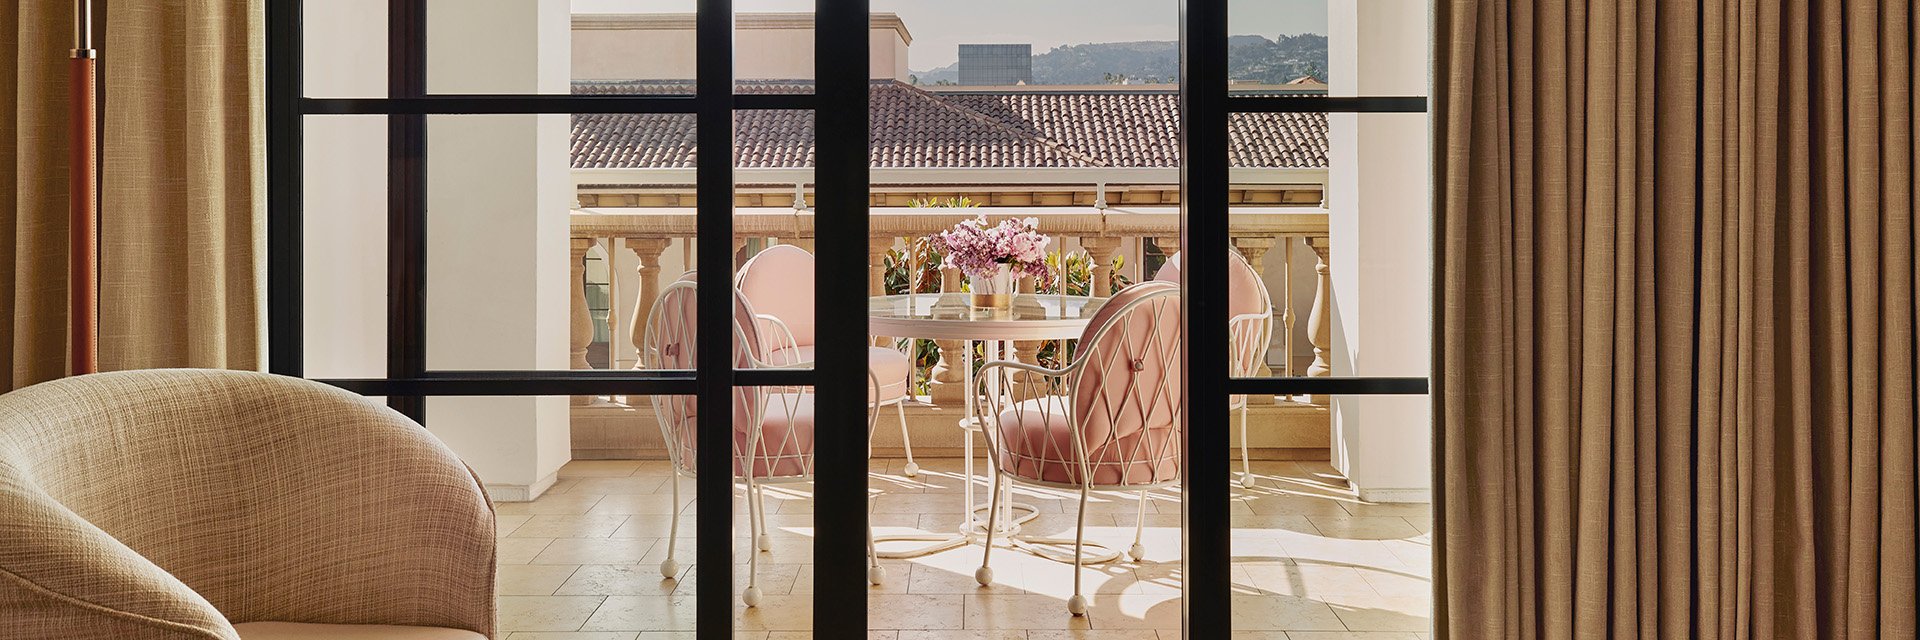 Open sliding glass doors that show an ivory tiled terrace with a glass table and pink potted flowers with four pink chairs.